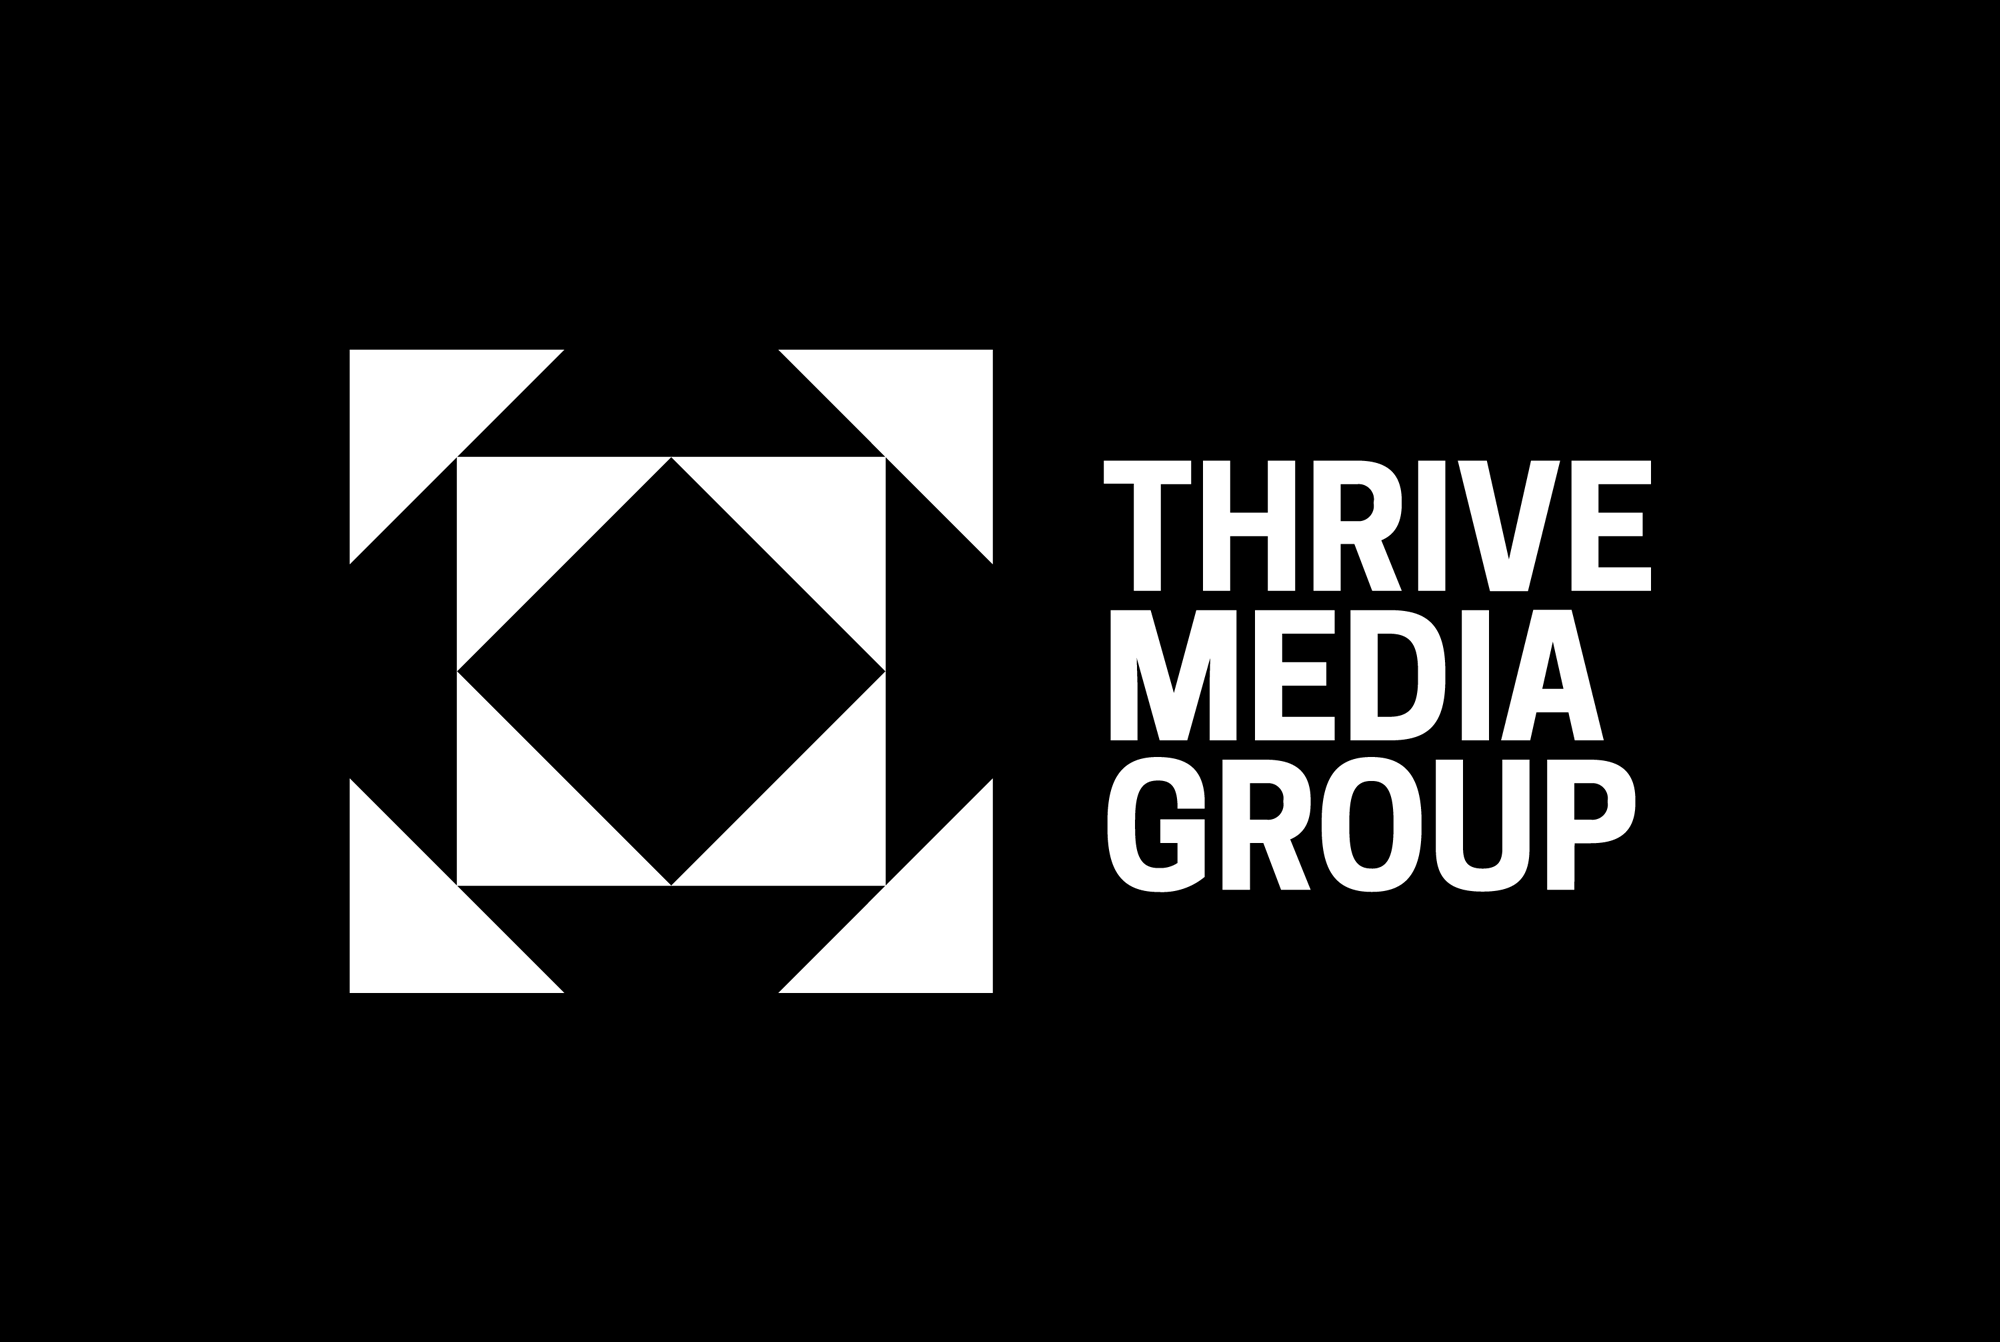 New Logo and Identity for Thrive Media Group by Ahoy